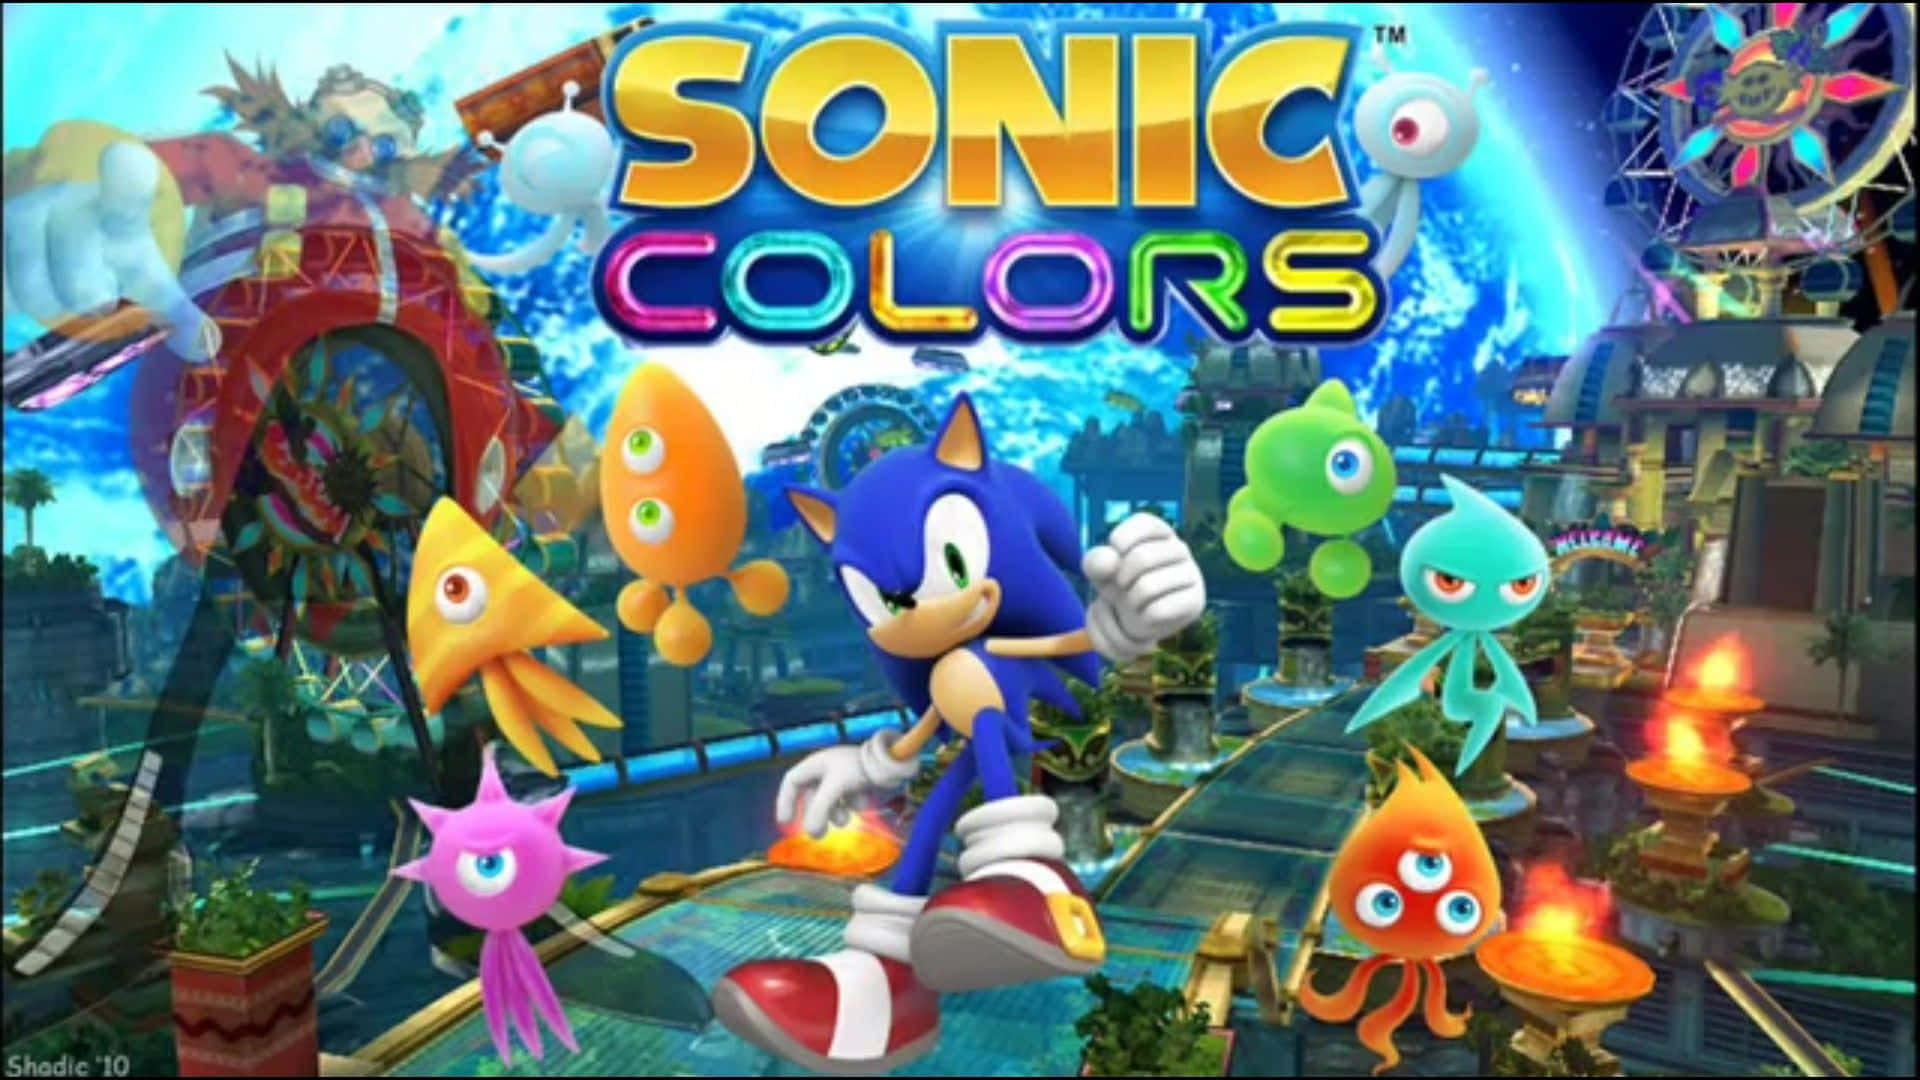 Sonicwaves Högt I Sonic Colors. Wallpaper